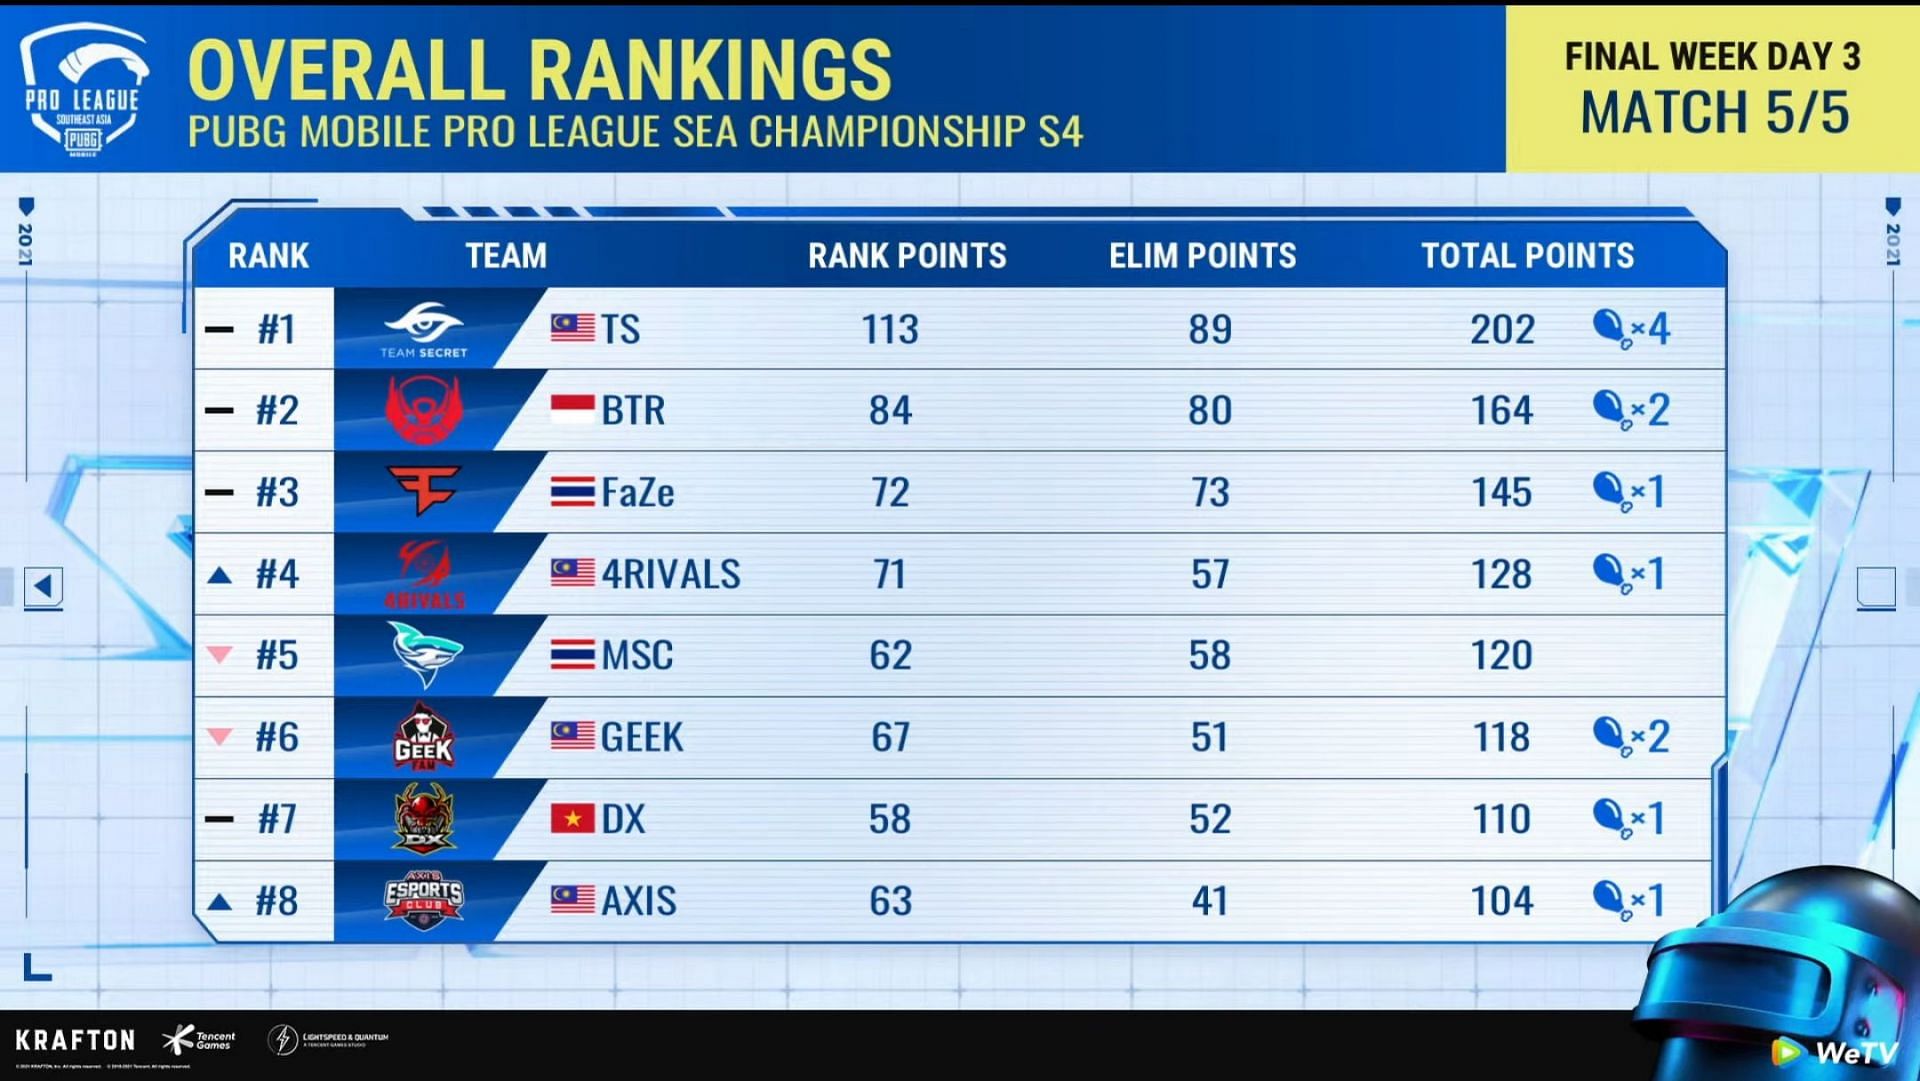 Overall standings of PMPL SEA Championships Season 4 Finals(Top 8 teams)